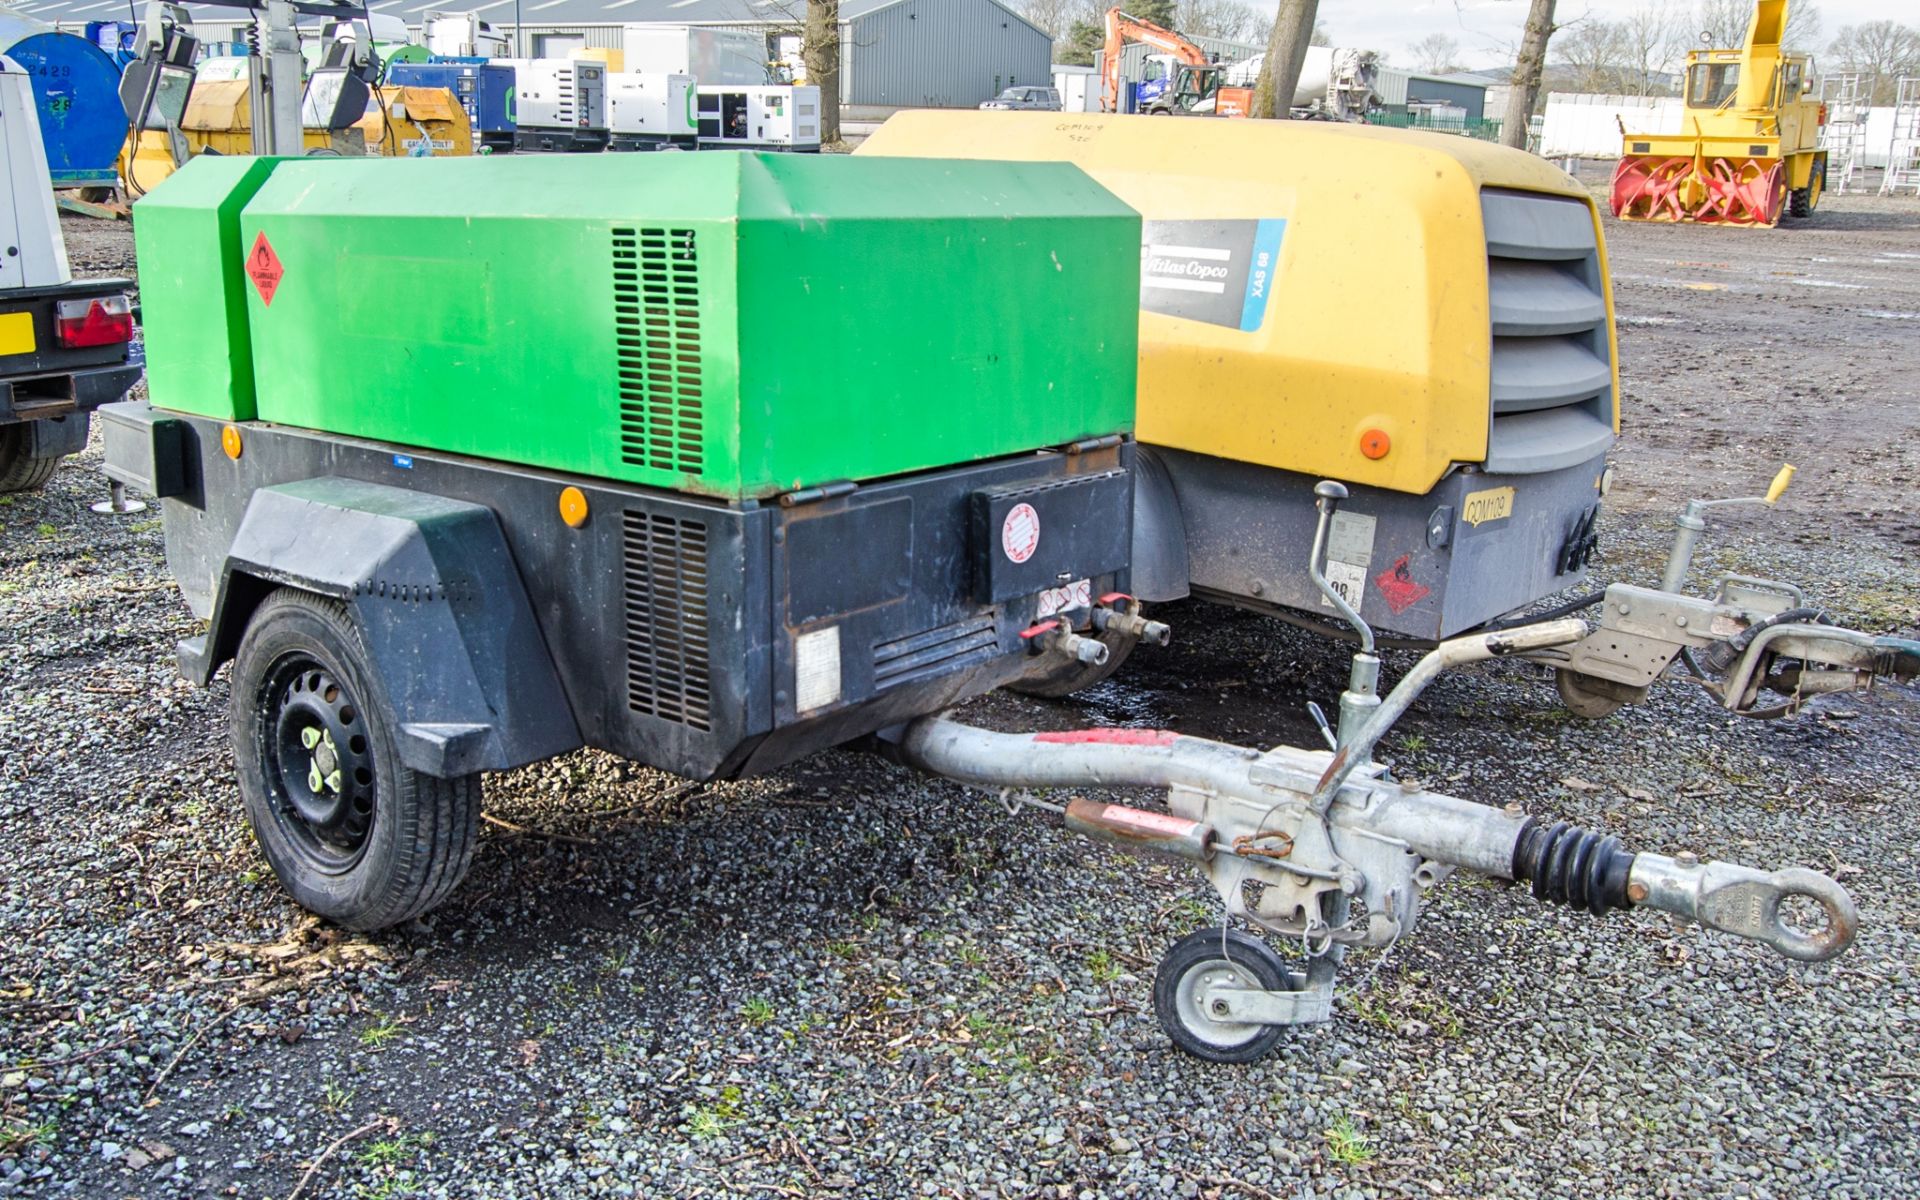 Doosan 741 diesel driven fast tow mobile air compressor Year: 2011 S/N: 430670 Recorded hours: - Image 2 of 7